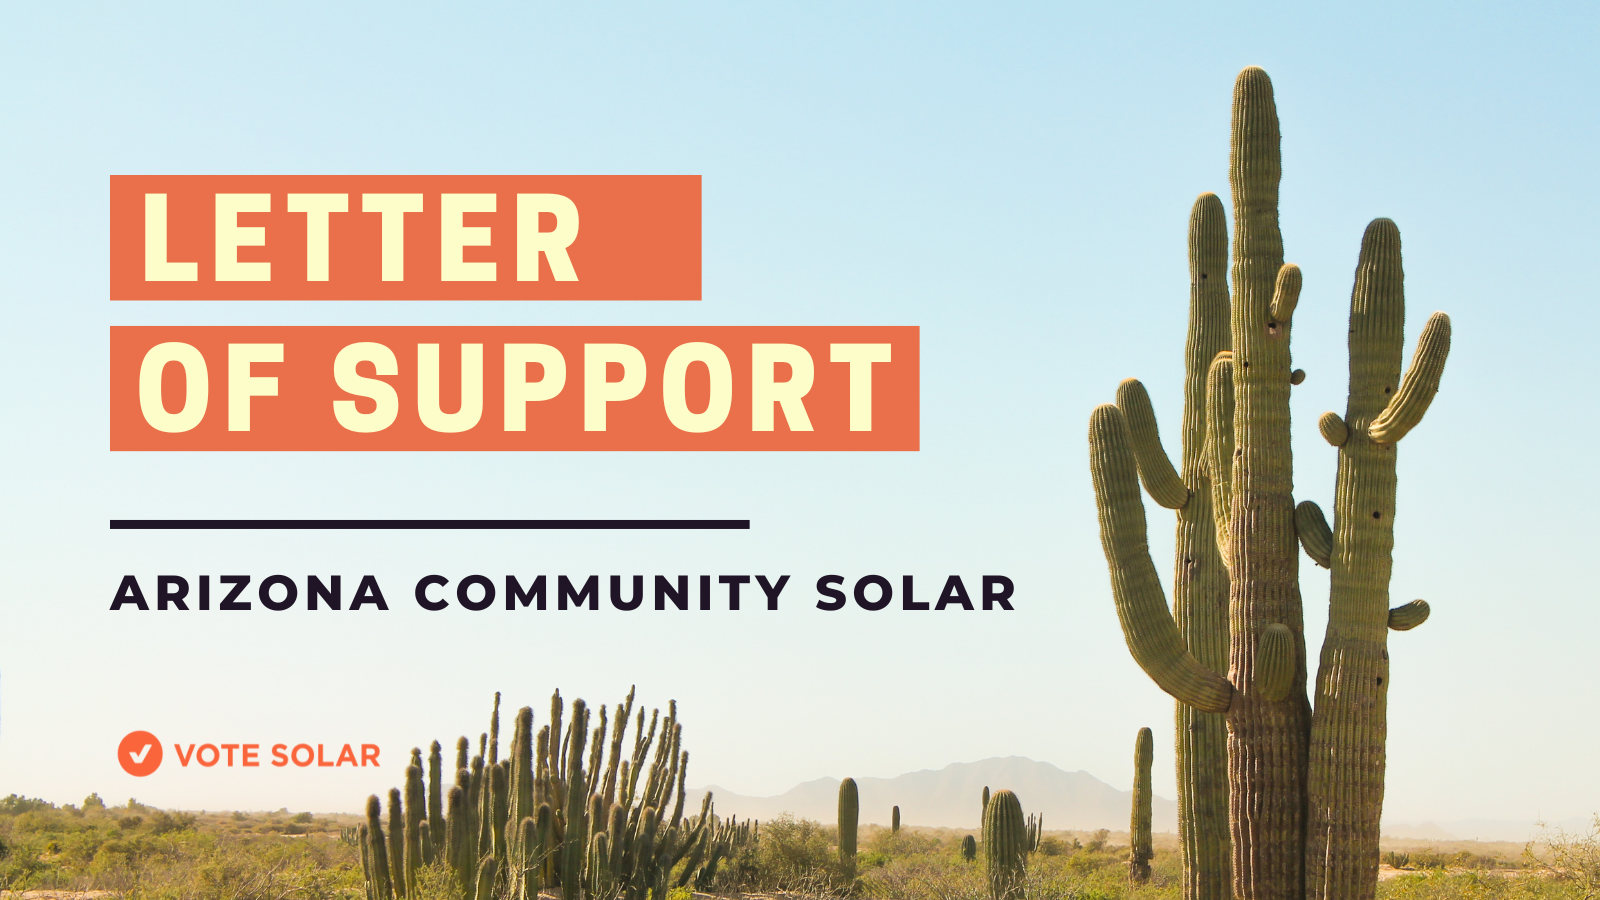 Arizona Community Solar Letter of Support Template